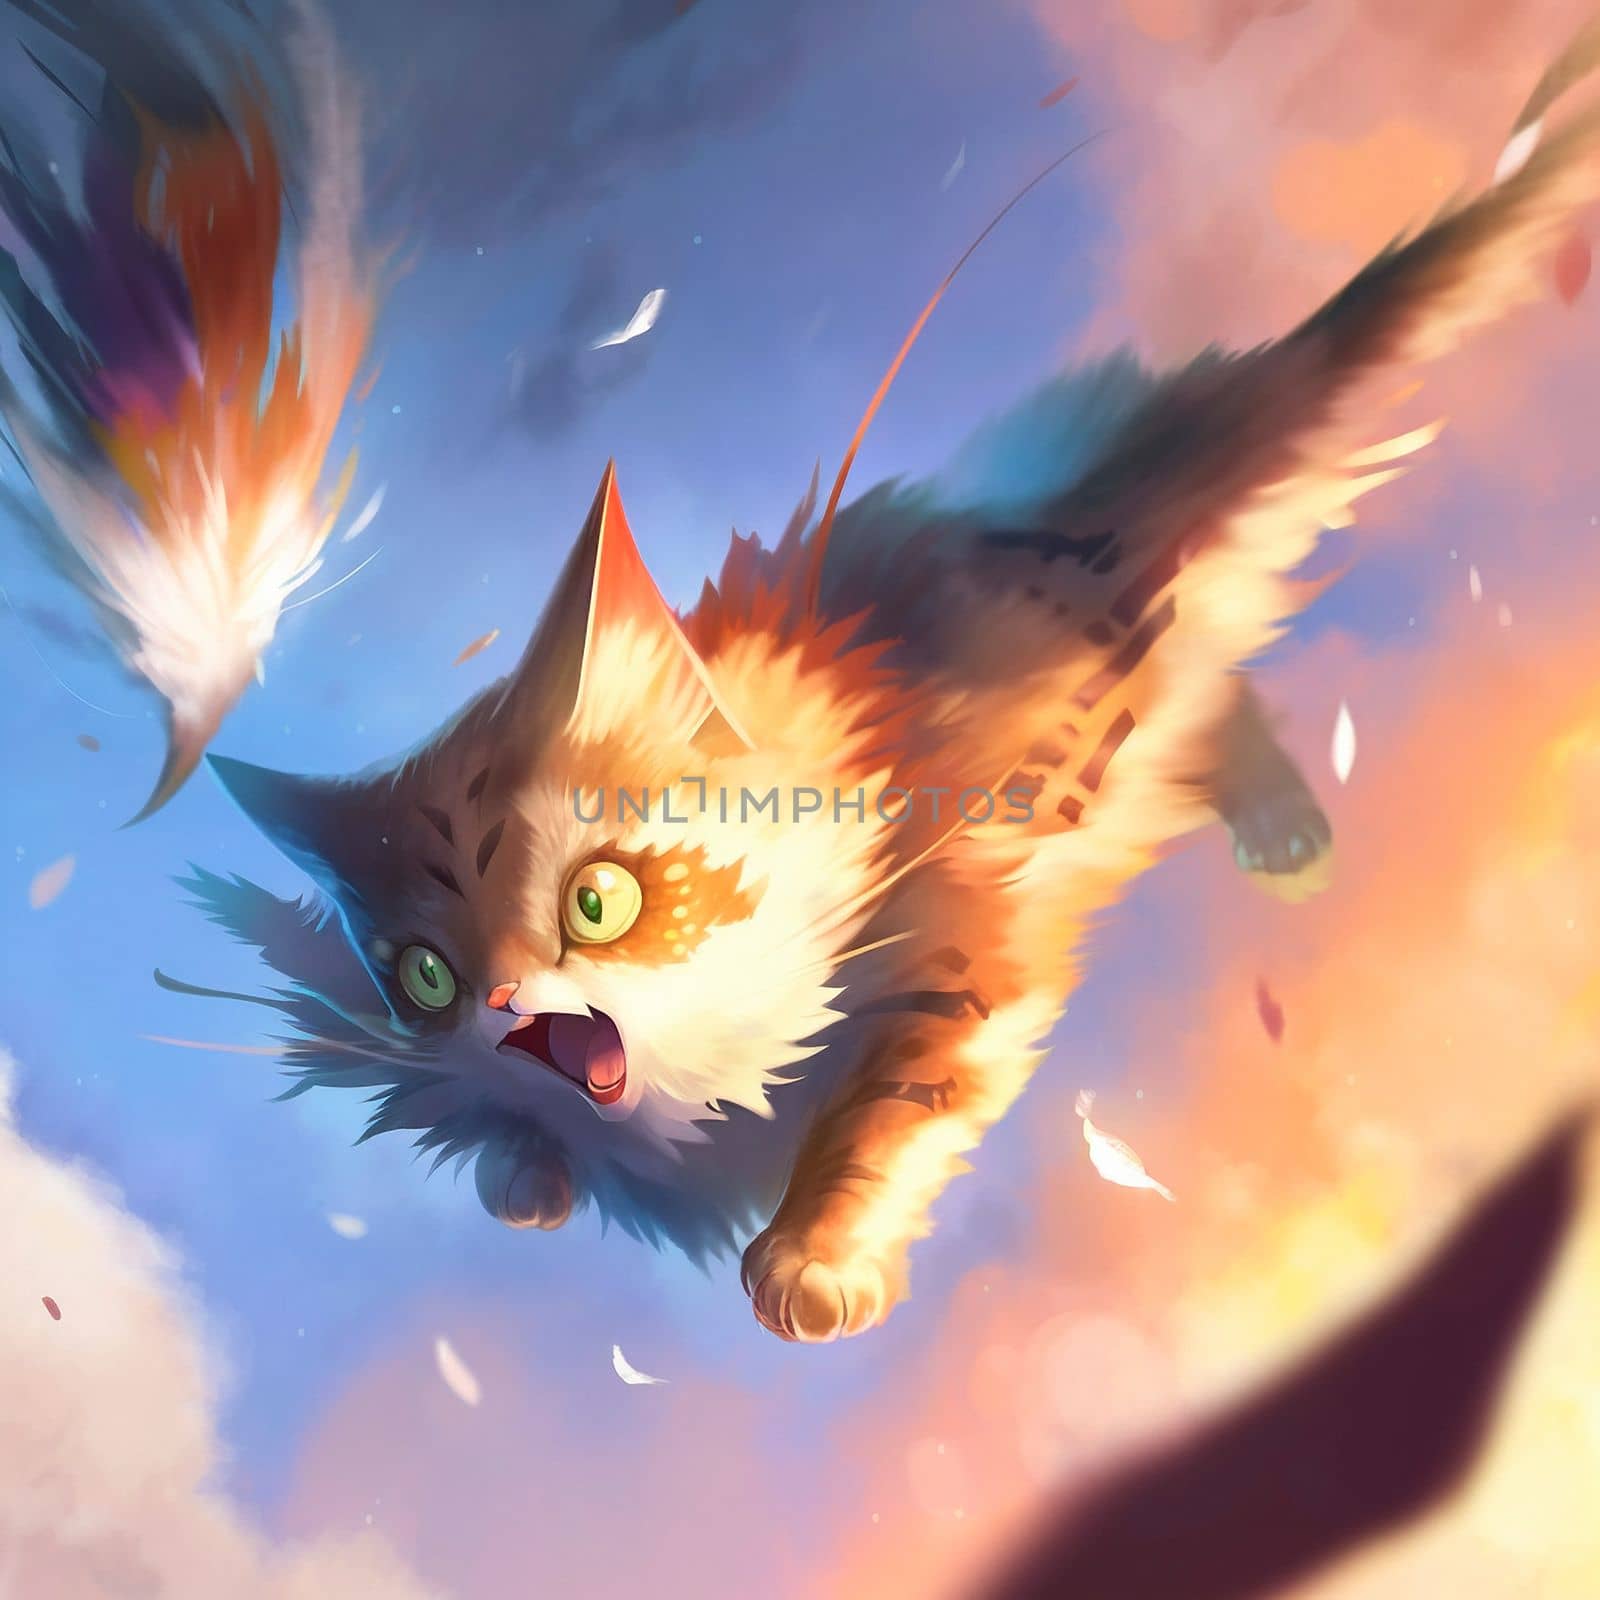 A cat falling from somewhere above by NeuroSky